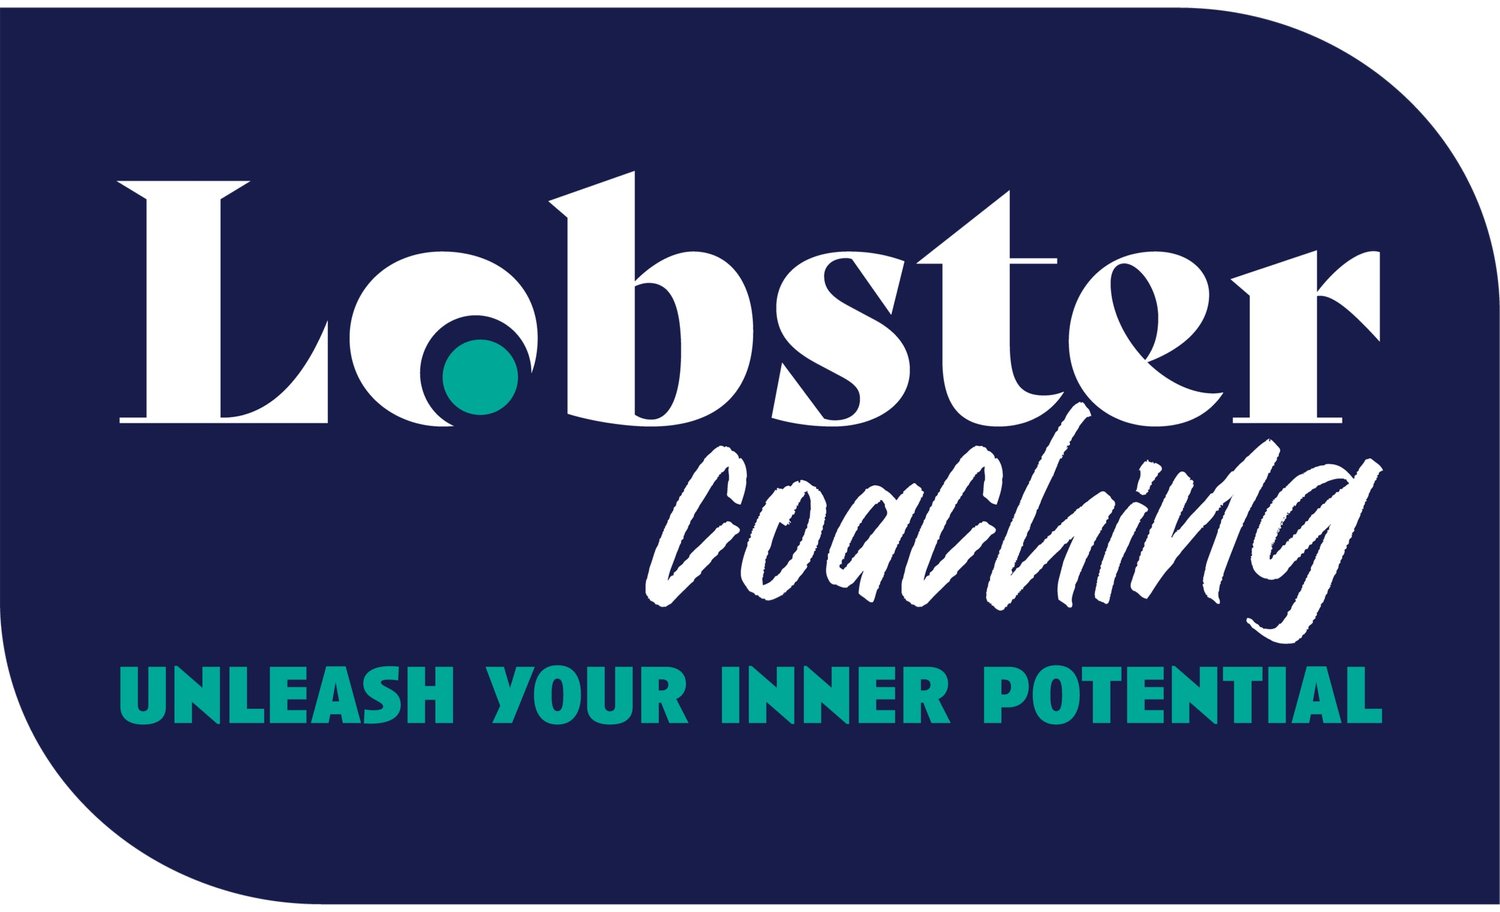 Lobster Coaching